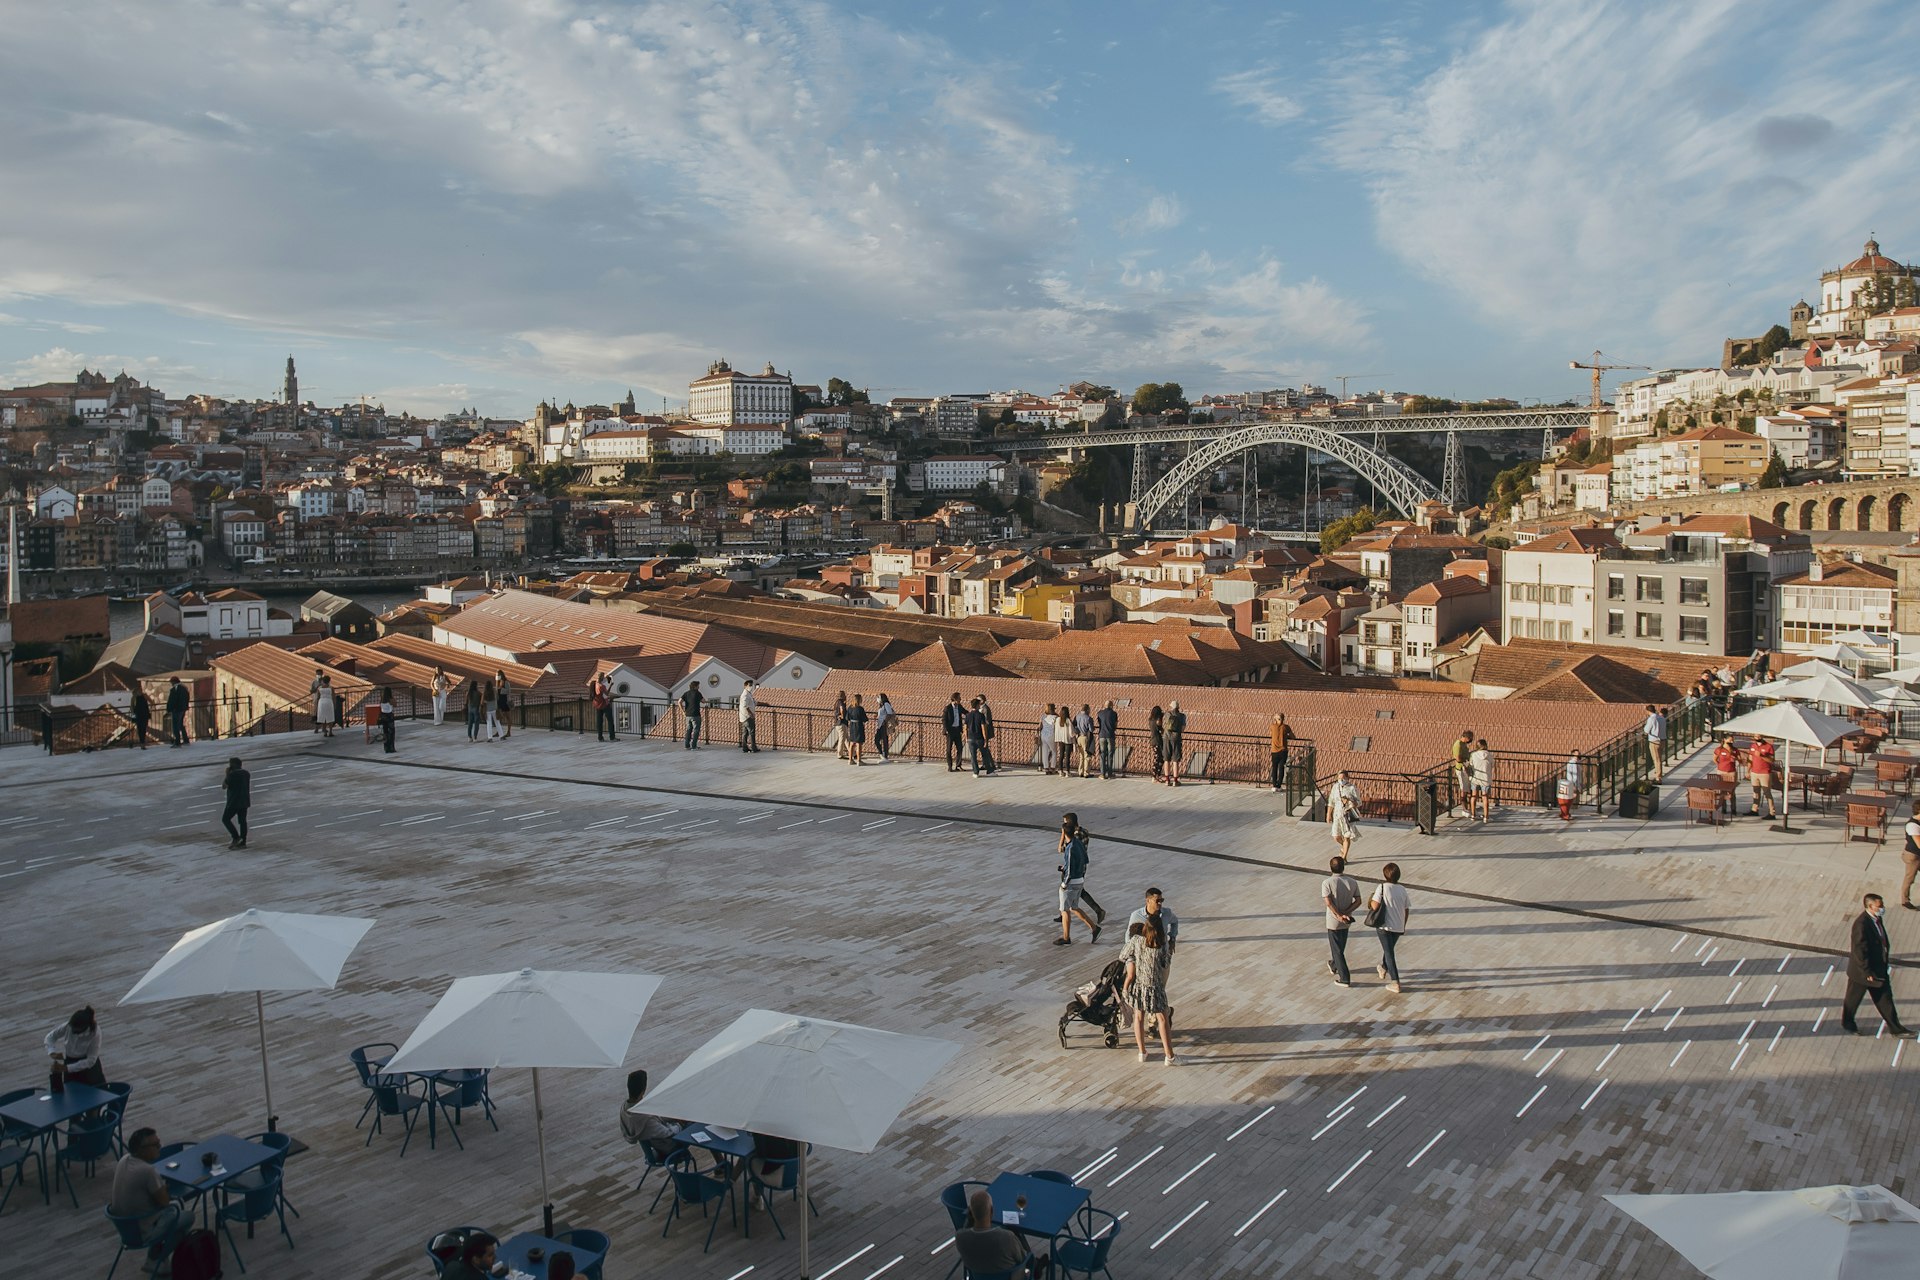 Diners sit at open-air tables on a rooftop overlooking Porto